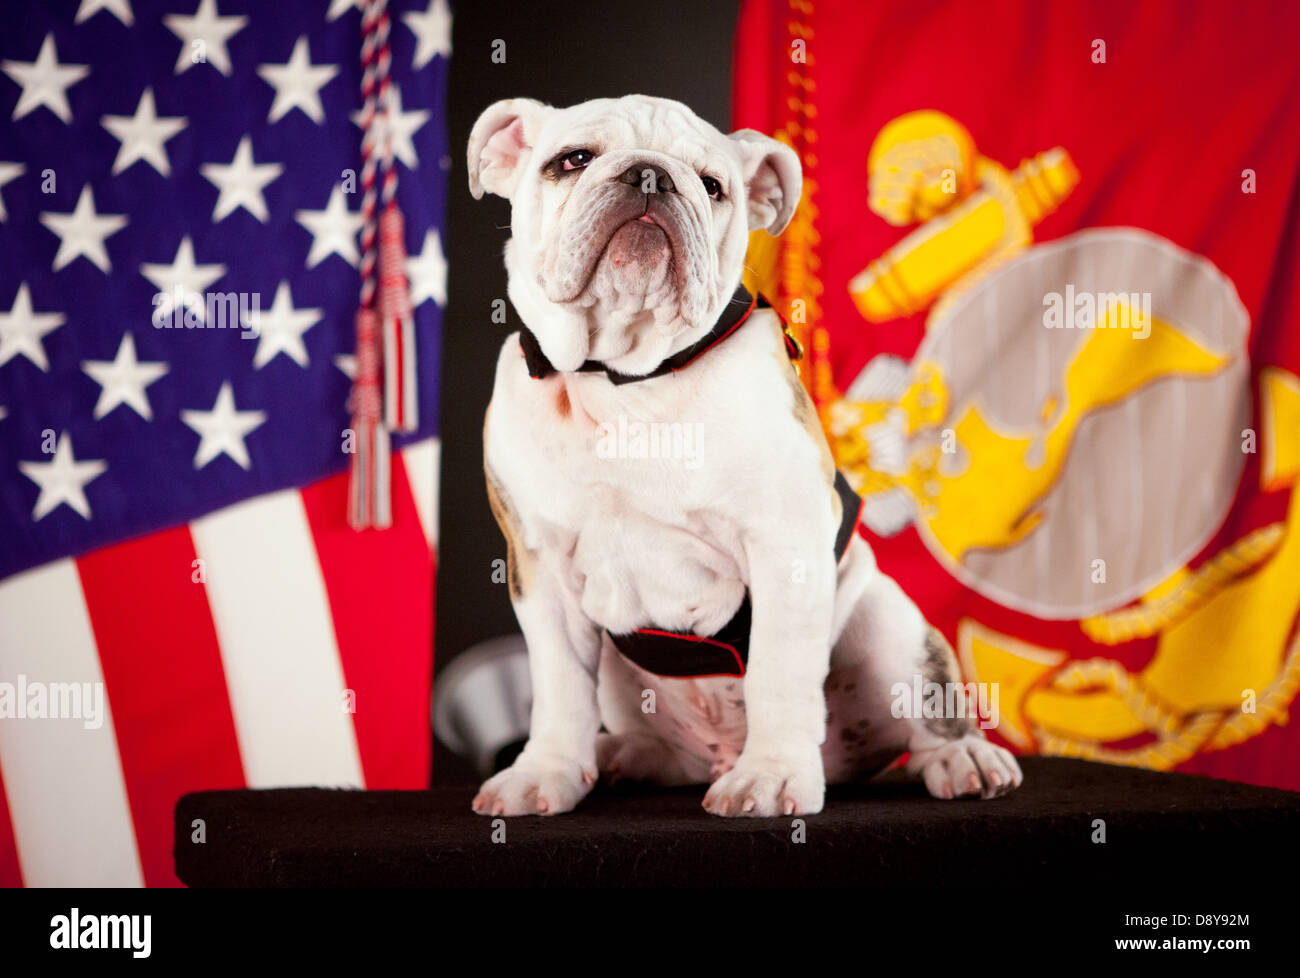 The official mascot of the US Marine Corps, English bulldog Pfc. Chesty the XIV, poses for his official photo May 15, 2013 in the Pentagon, Arlington, VA . Chesty the XIV will officially take over as the mascot when his predecessor, Sgt. Chesty the XIII, retires in the fall of 2013. Stock Photo